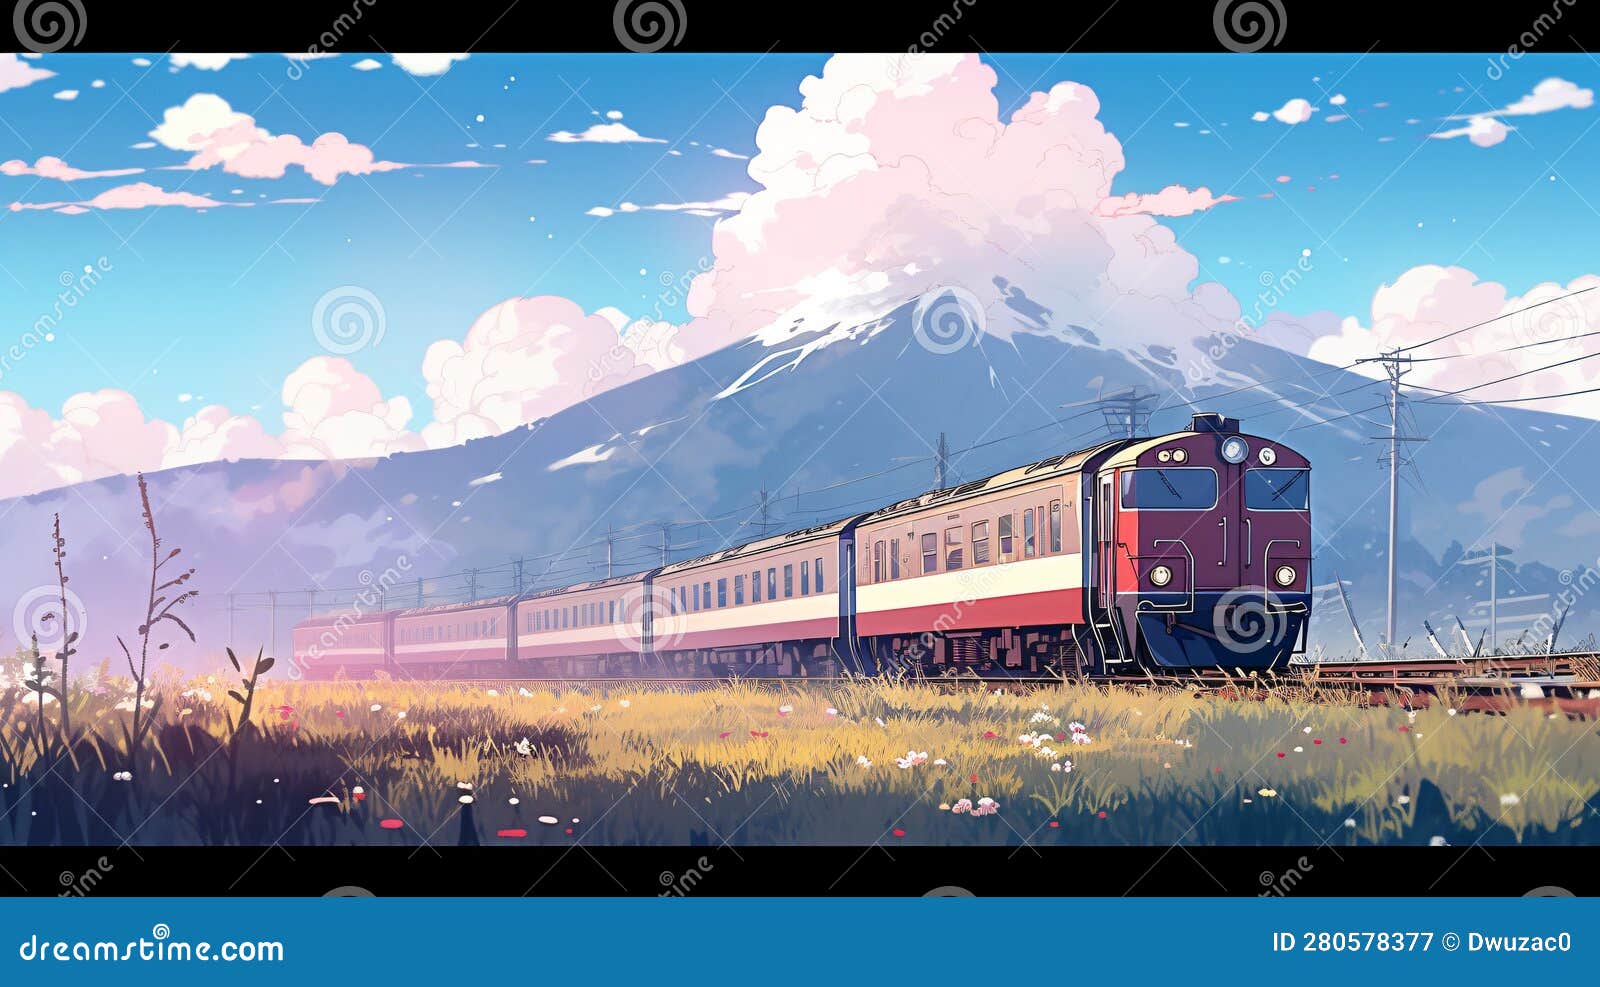 Download 1680x1050 Anime Landscape, Train Station, Scenery, Ocean, Clear  Sky Wallpapers for MacBook Pro 15 inch